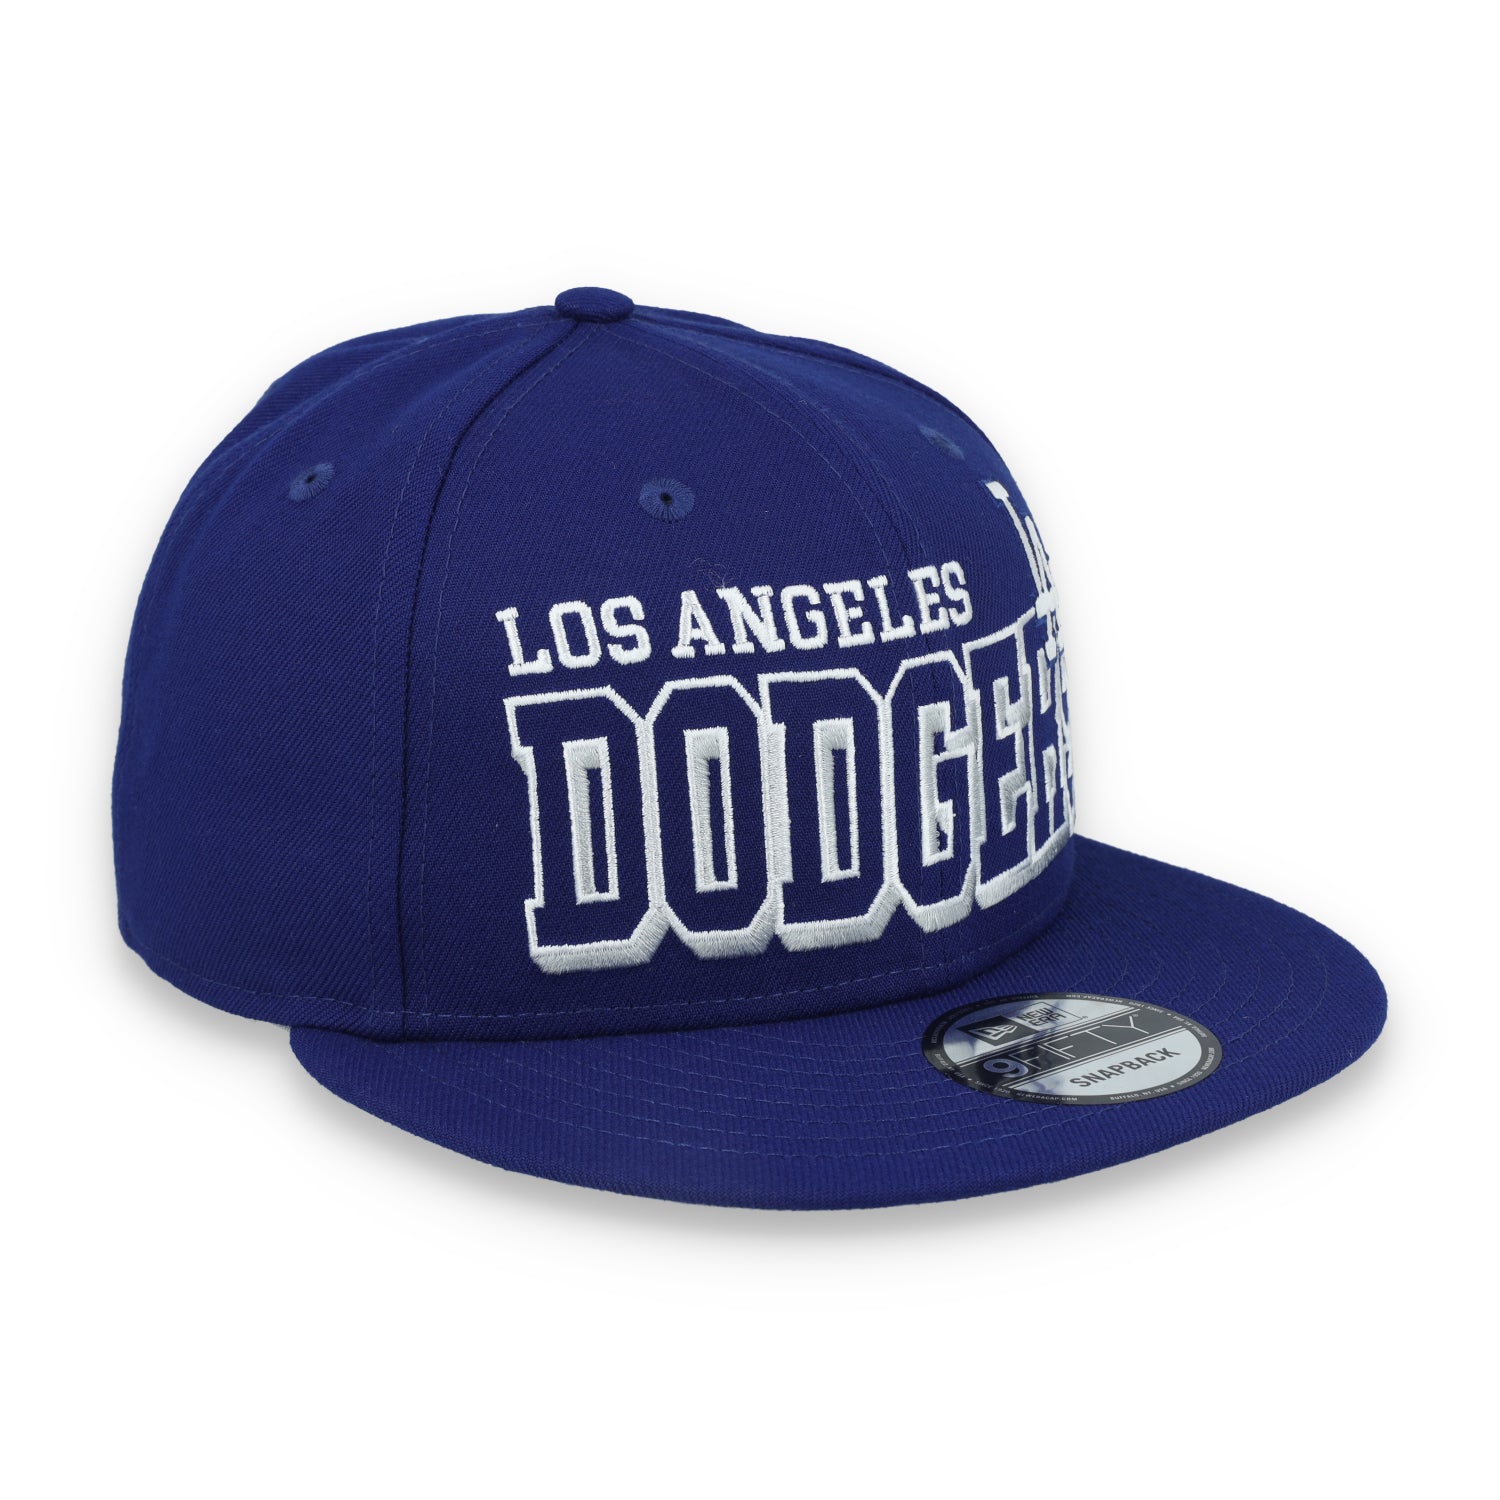 New Era Los Angels Dogers Game Day 9FIFTY Snapback Hat